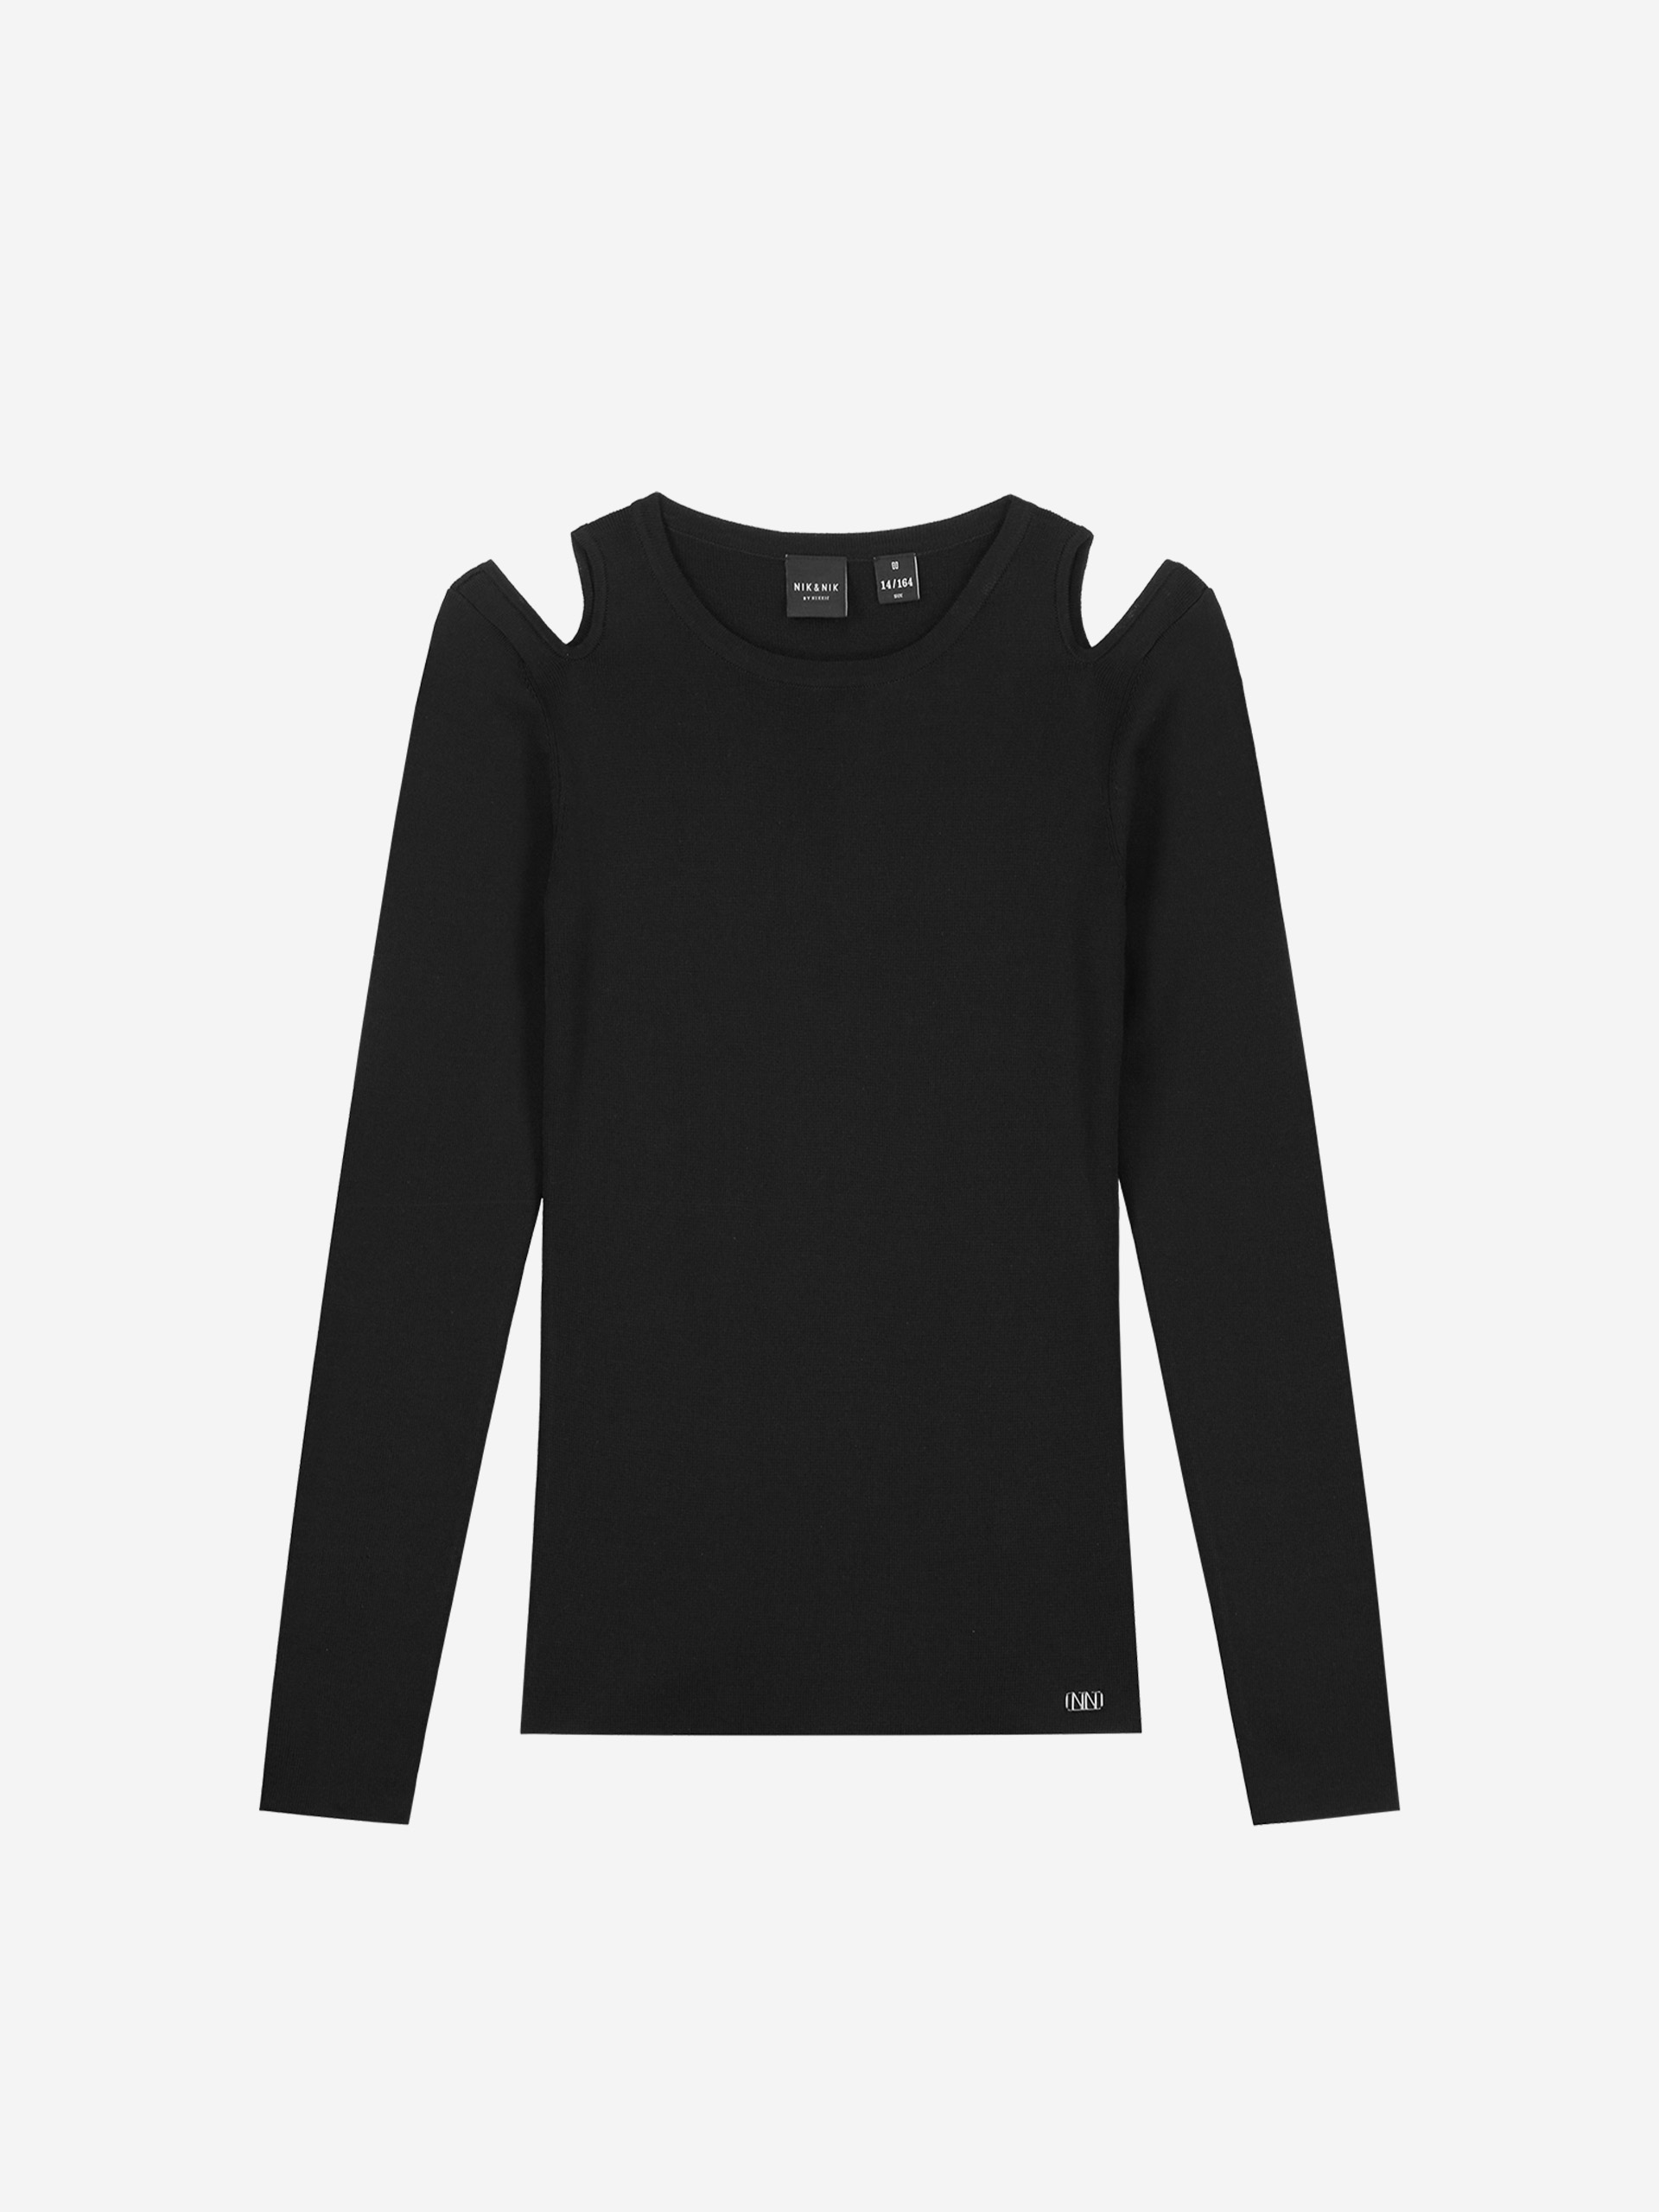 Long-sleeved top with cut outs